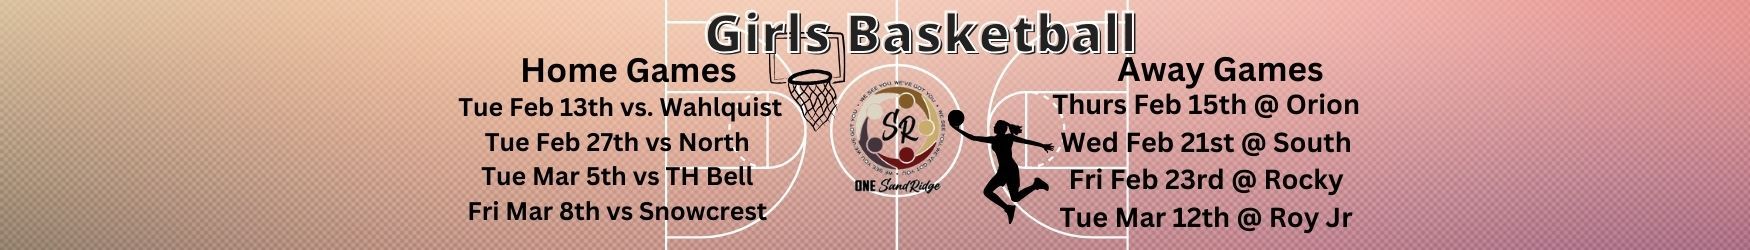 Girls Basketball Schedule for Games Click Link for Standings & Schedule